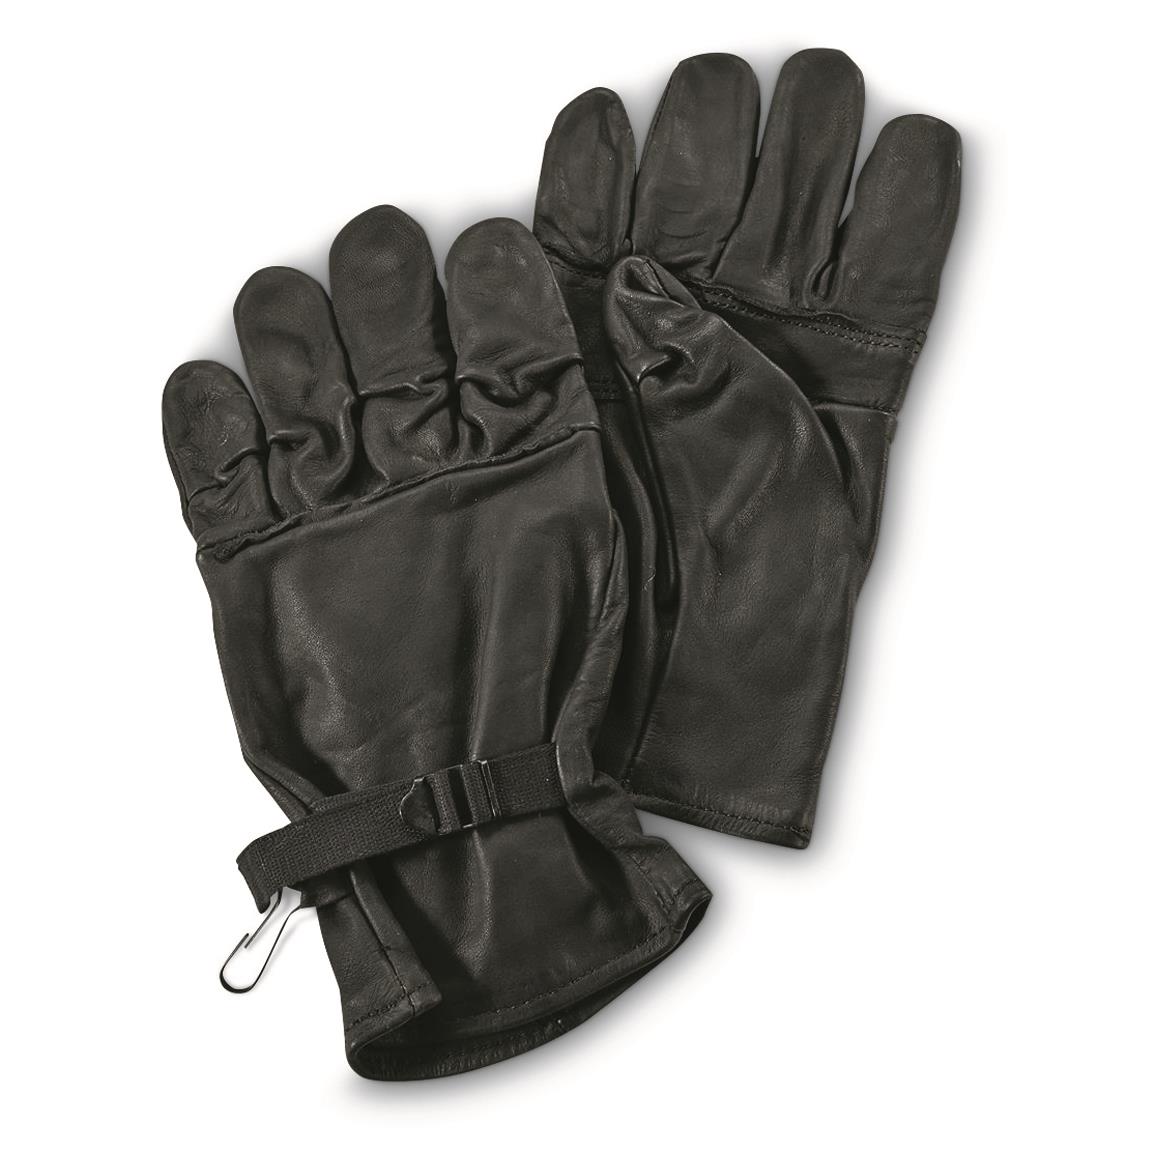 LARGE W/LINER U.S MILITARY STYLE D-3A LEATHER GLOVES COLD WEATHER SIZE 6 X 